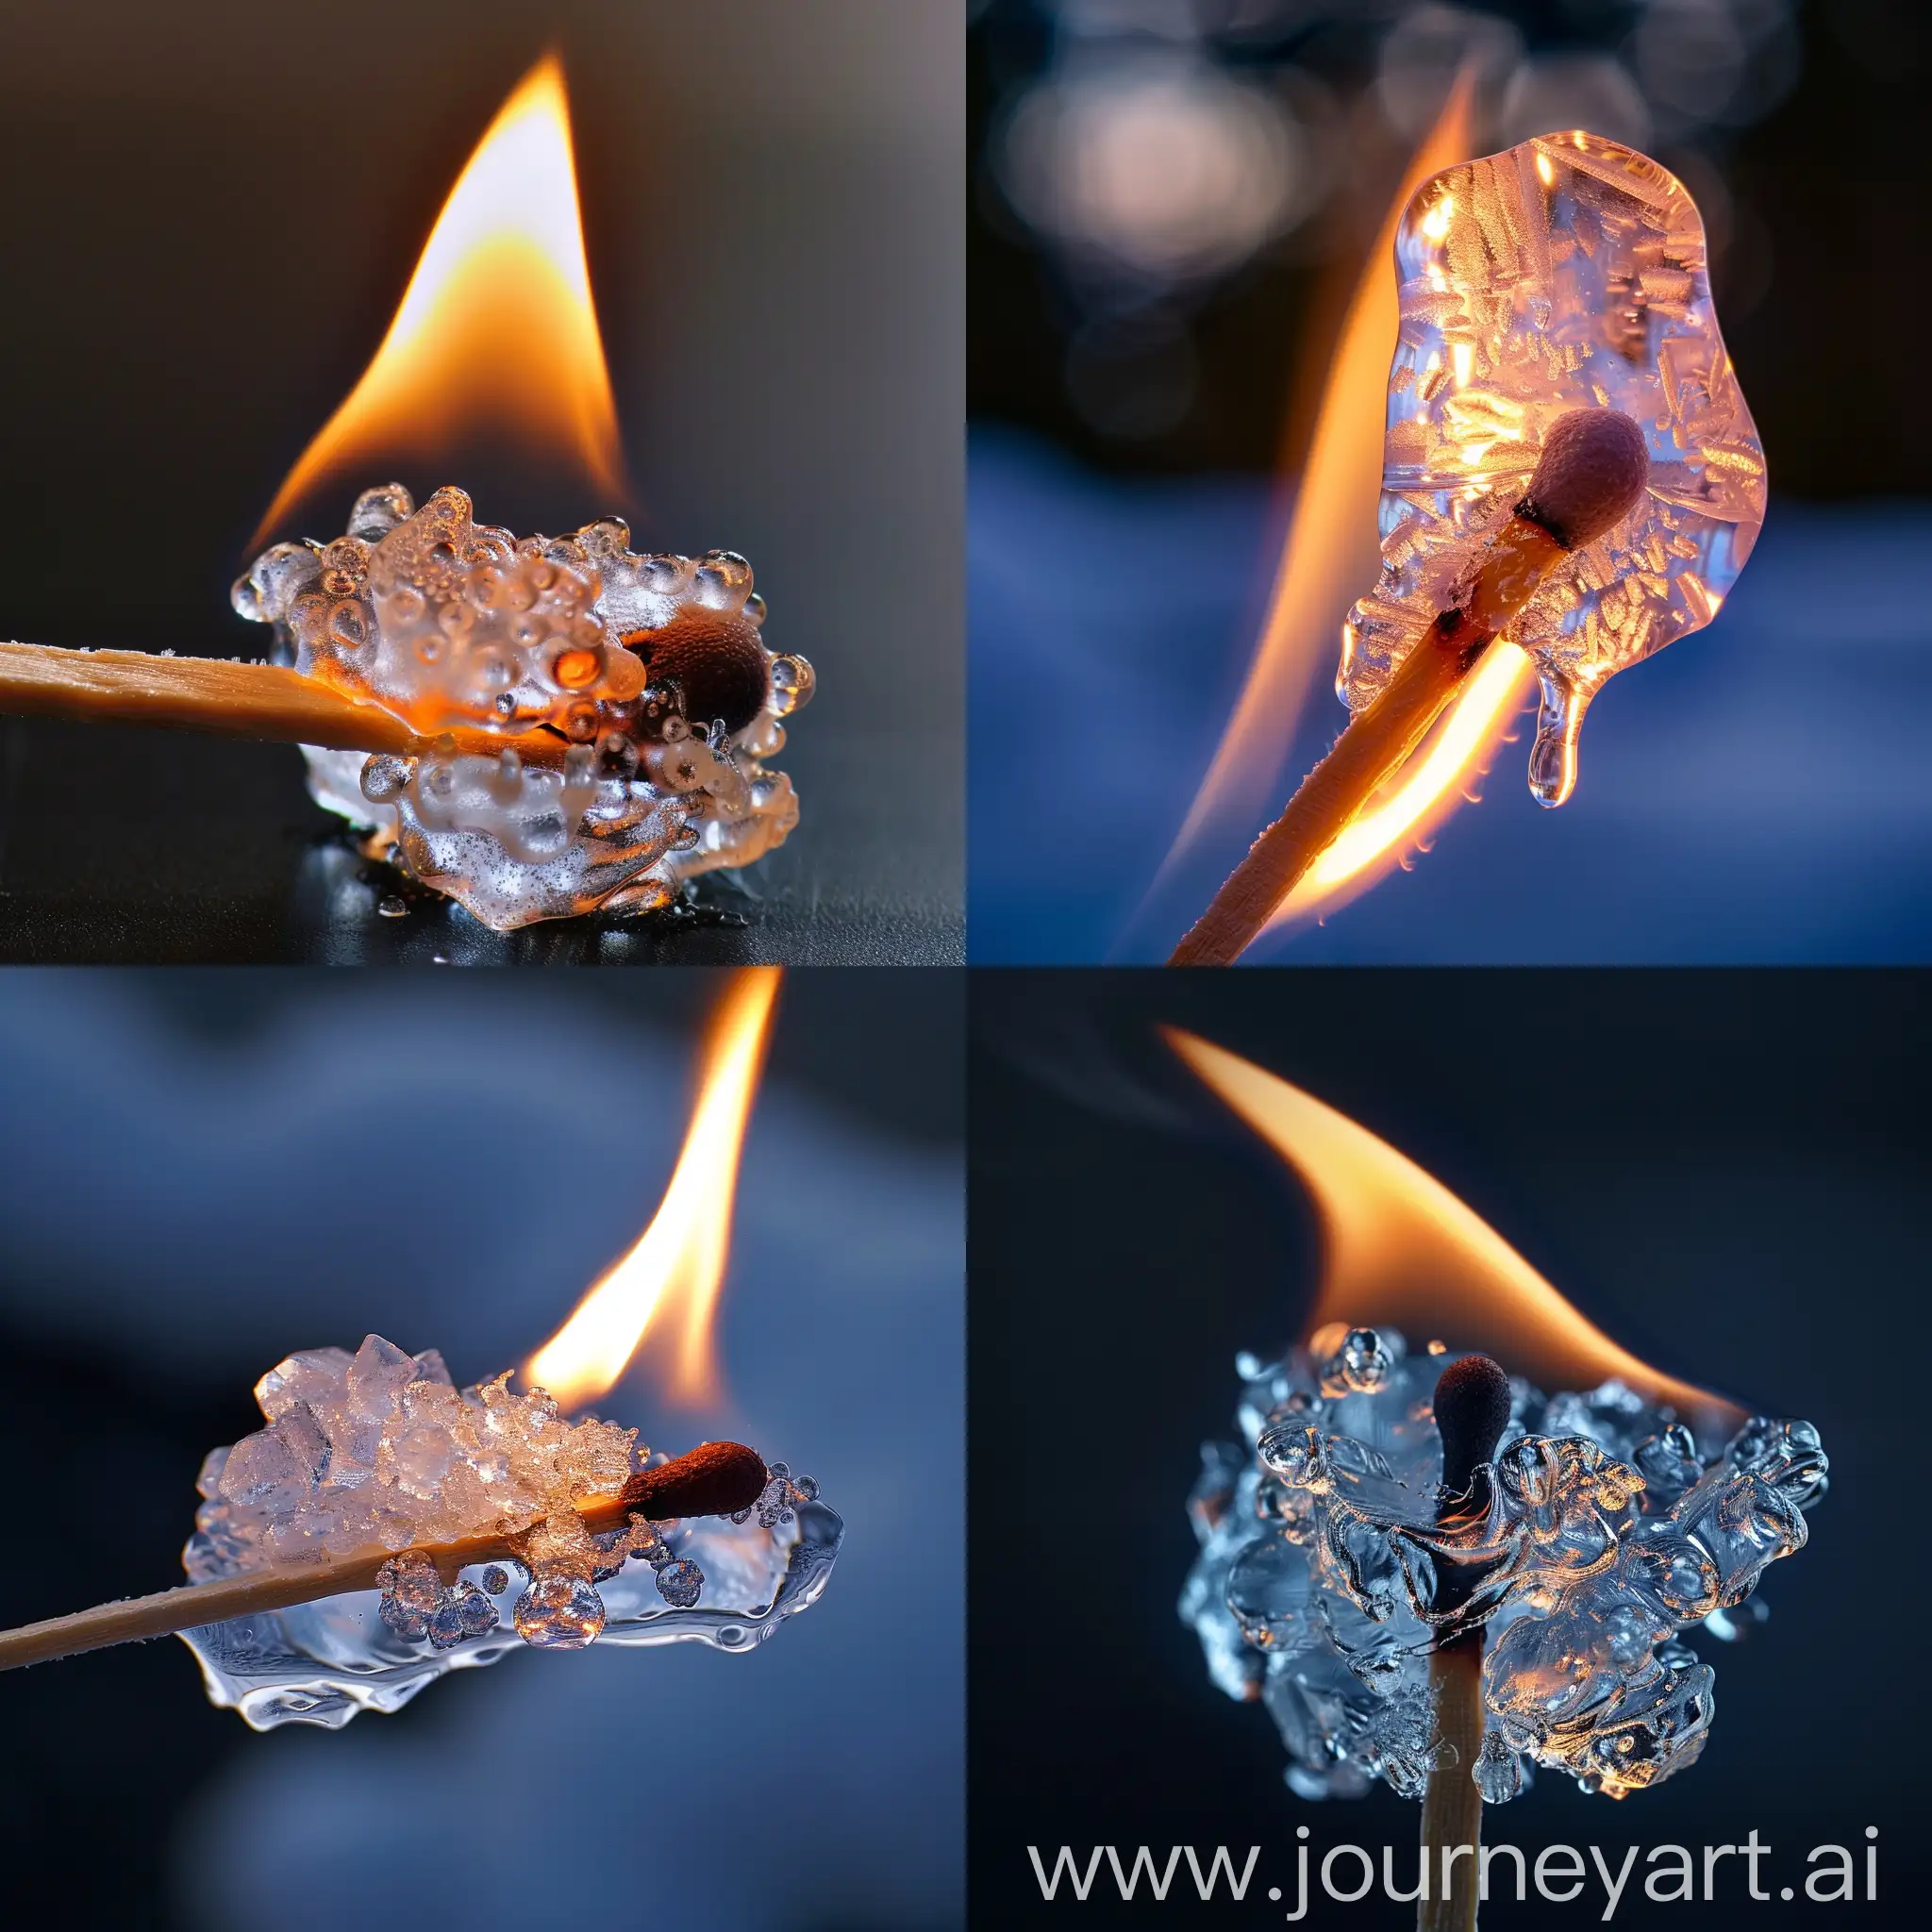 Fiery-Ice-Spectacular-Closeup-of-a-Matchstick-Igniting